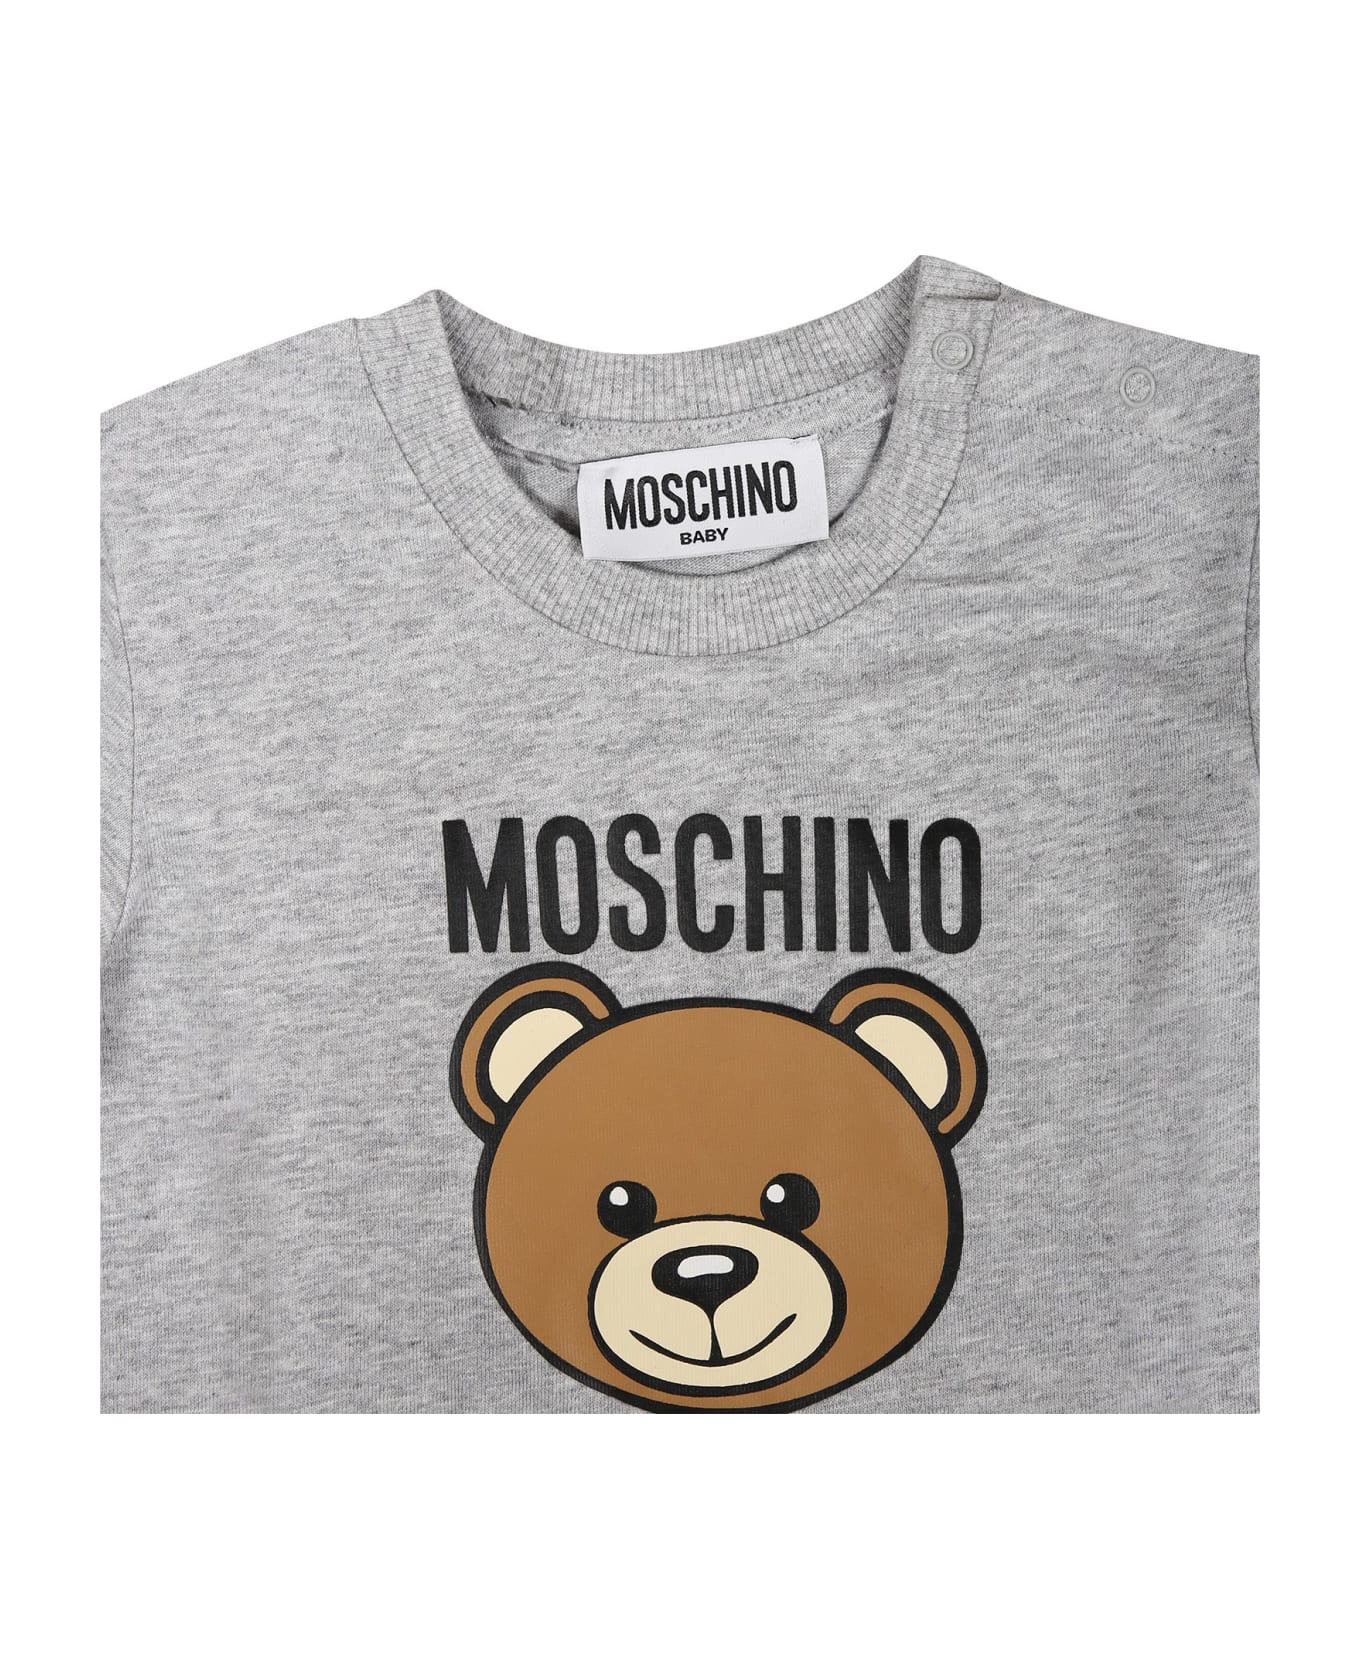 Moschino Multicolor Set For Baby Boy With Teddy Bear And Logo - Grey ボトムス